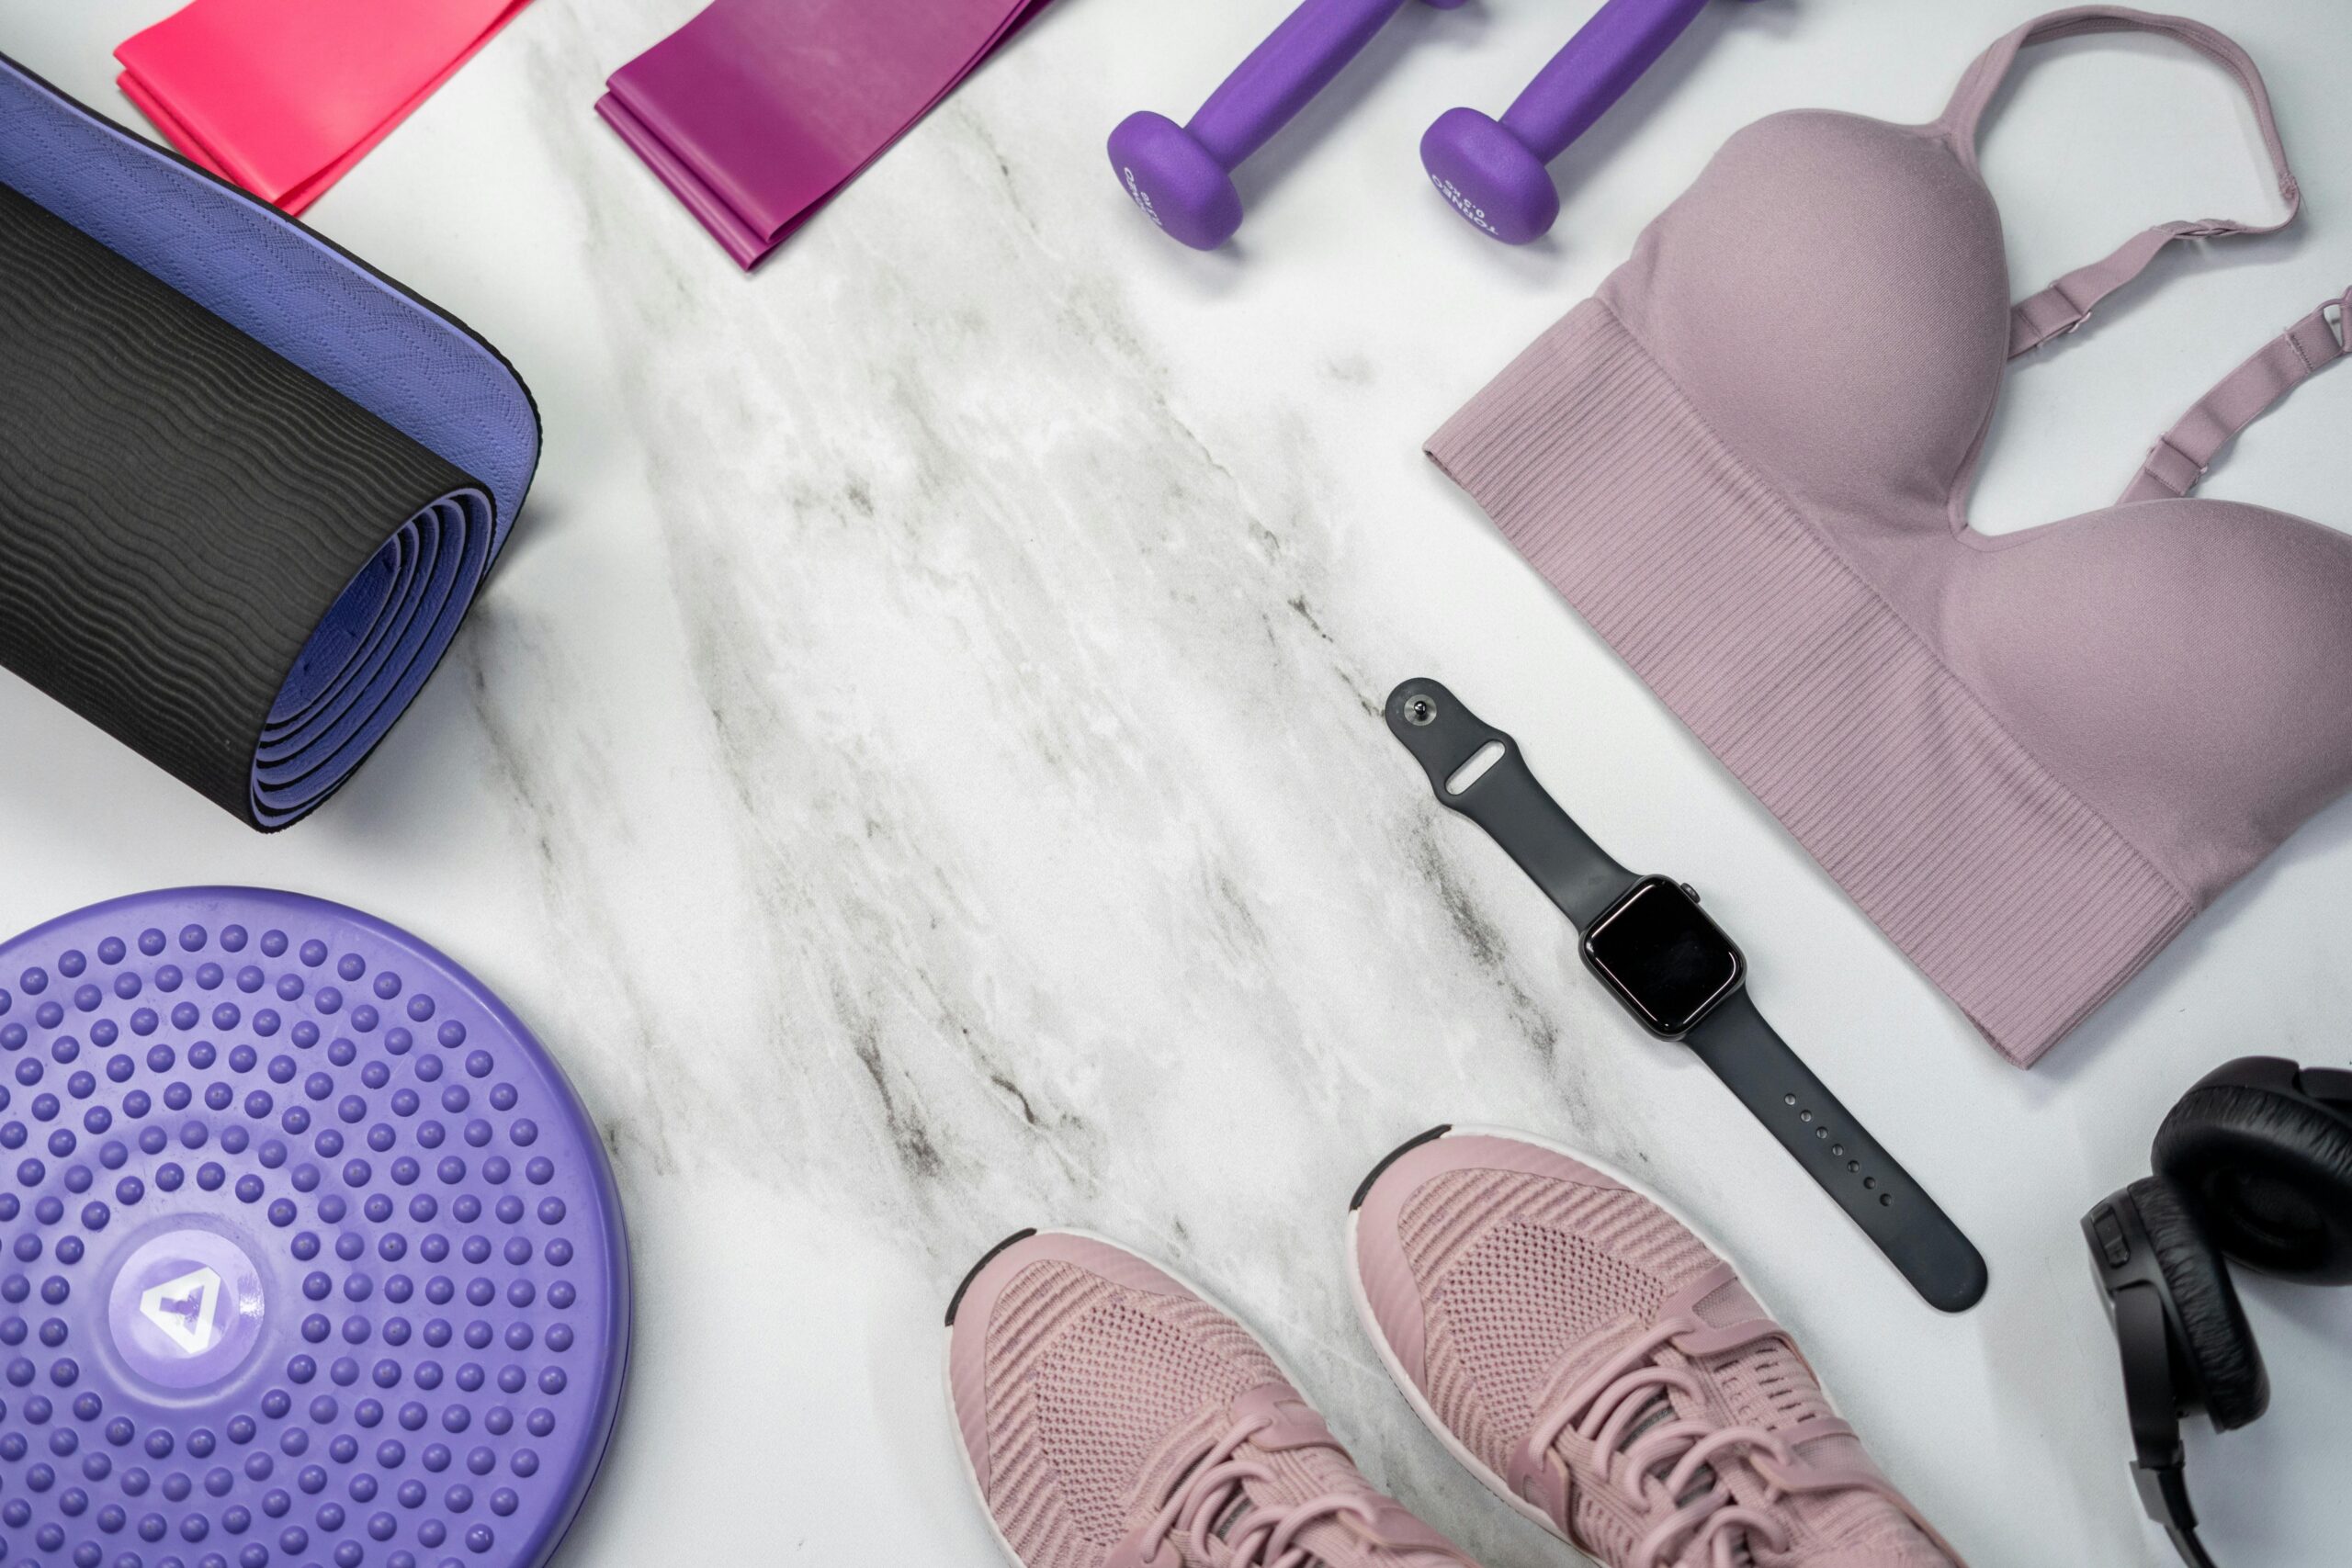 Yoga mat, smart watch, dumbbells, sport shoes, and yoga straps arranged for a workout.